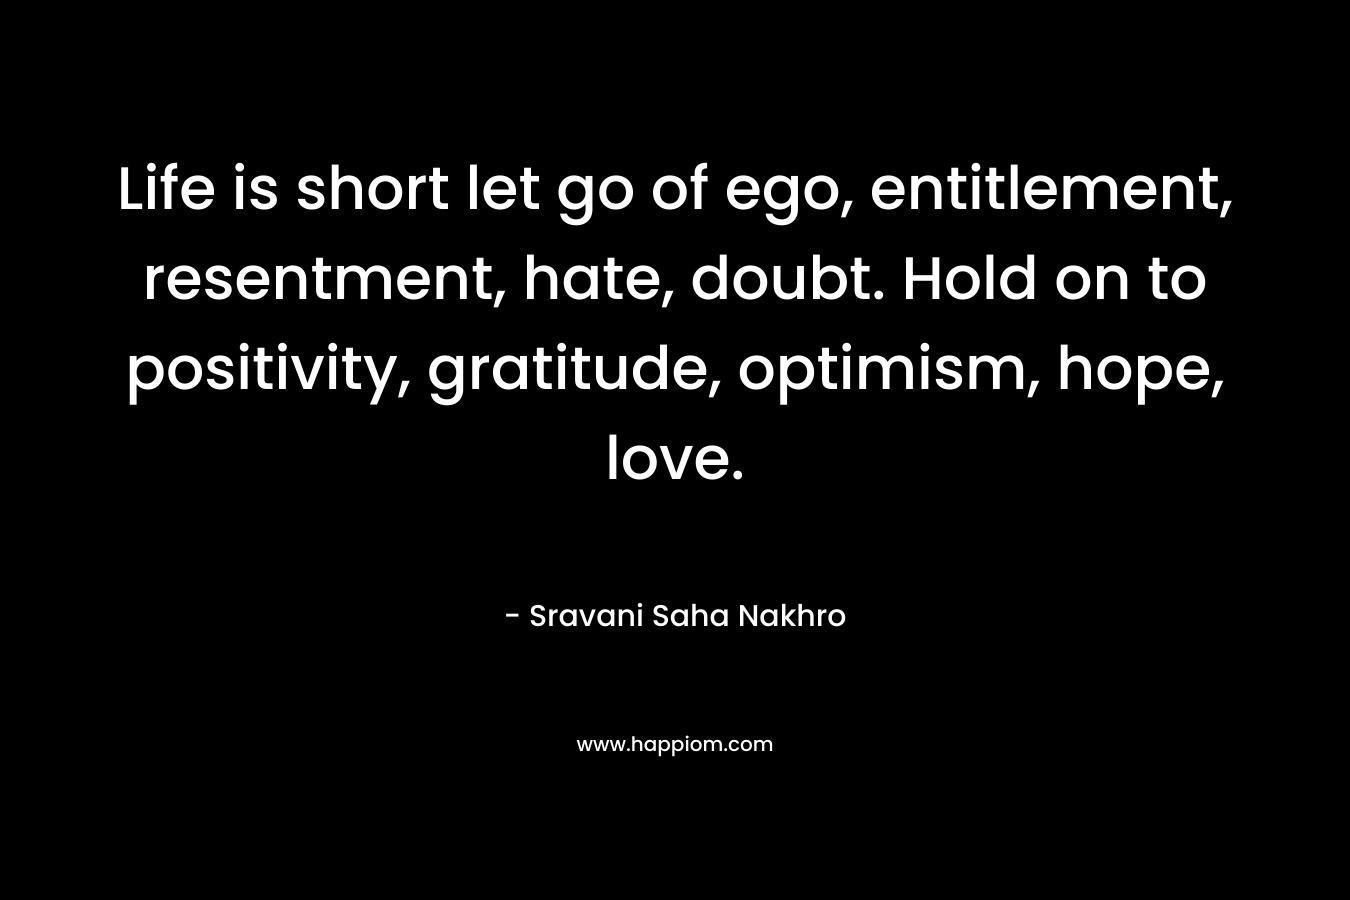 Life is short let go of ego, entitlement, resentment, hate, doubt. Hold on to positivity, gratitude, optimism, hope, love.